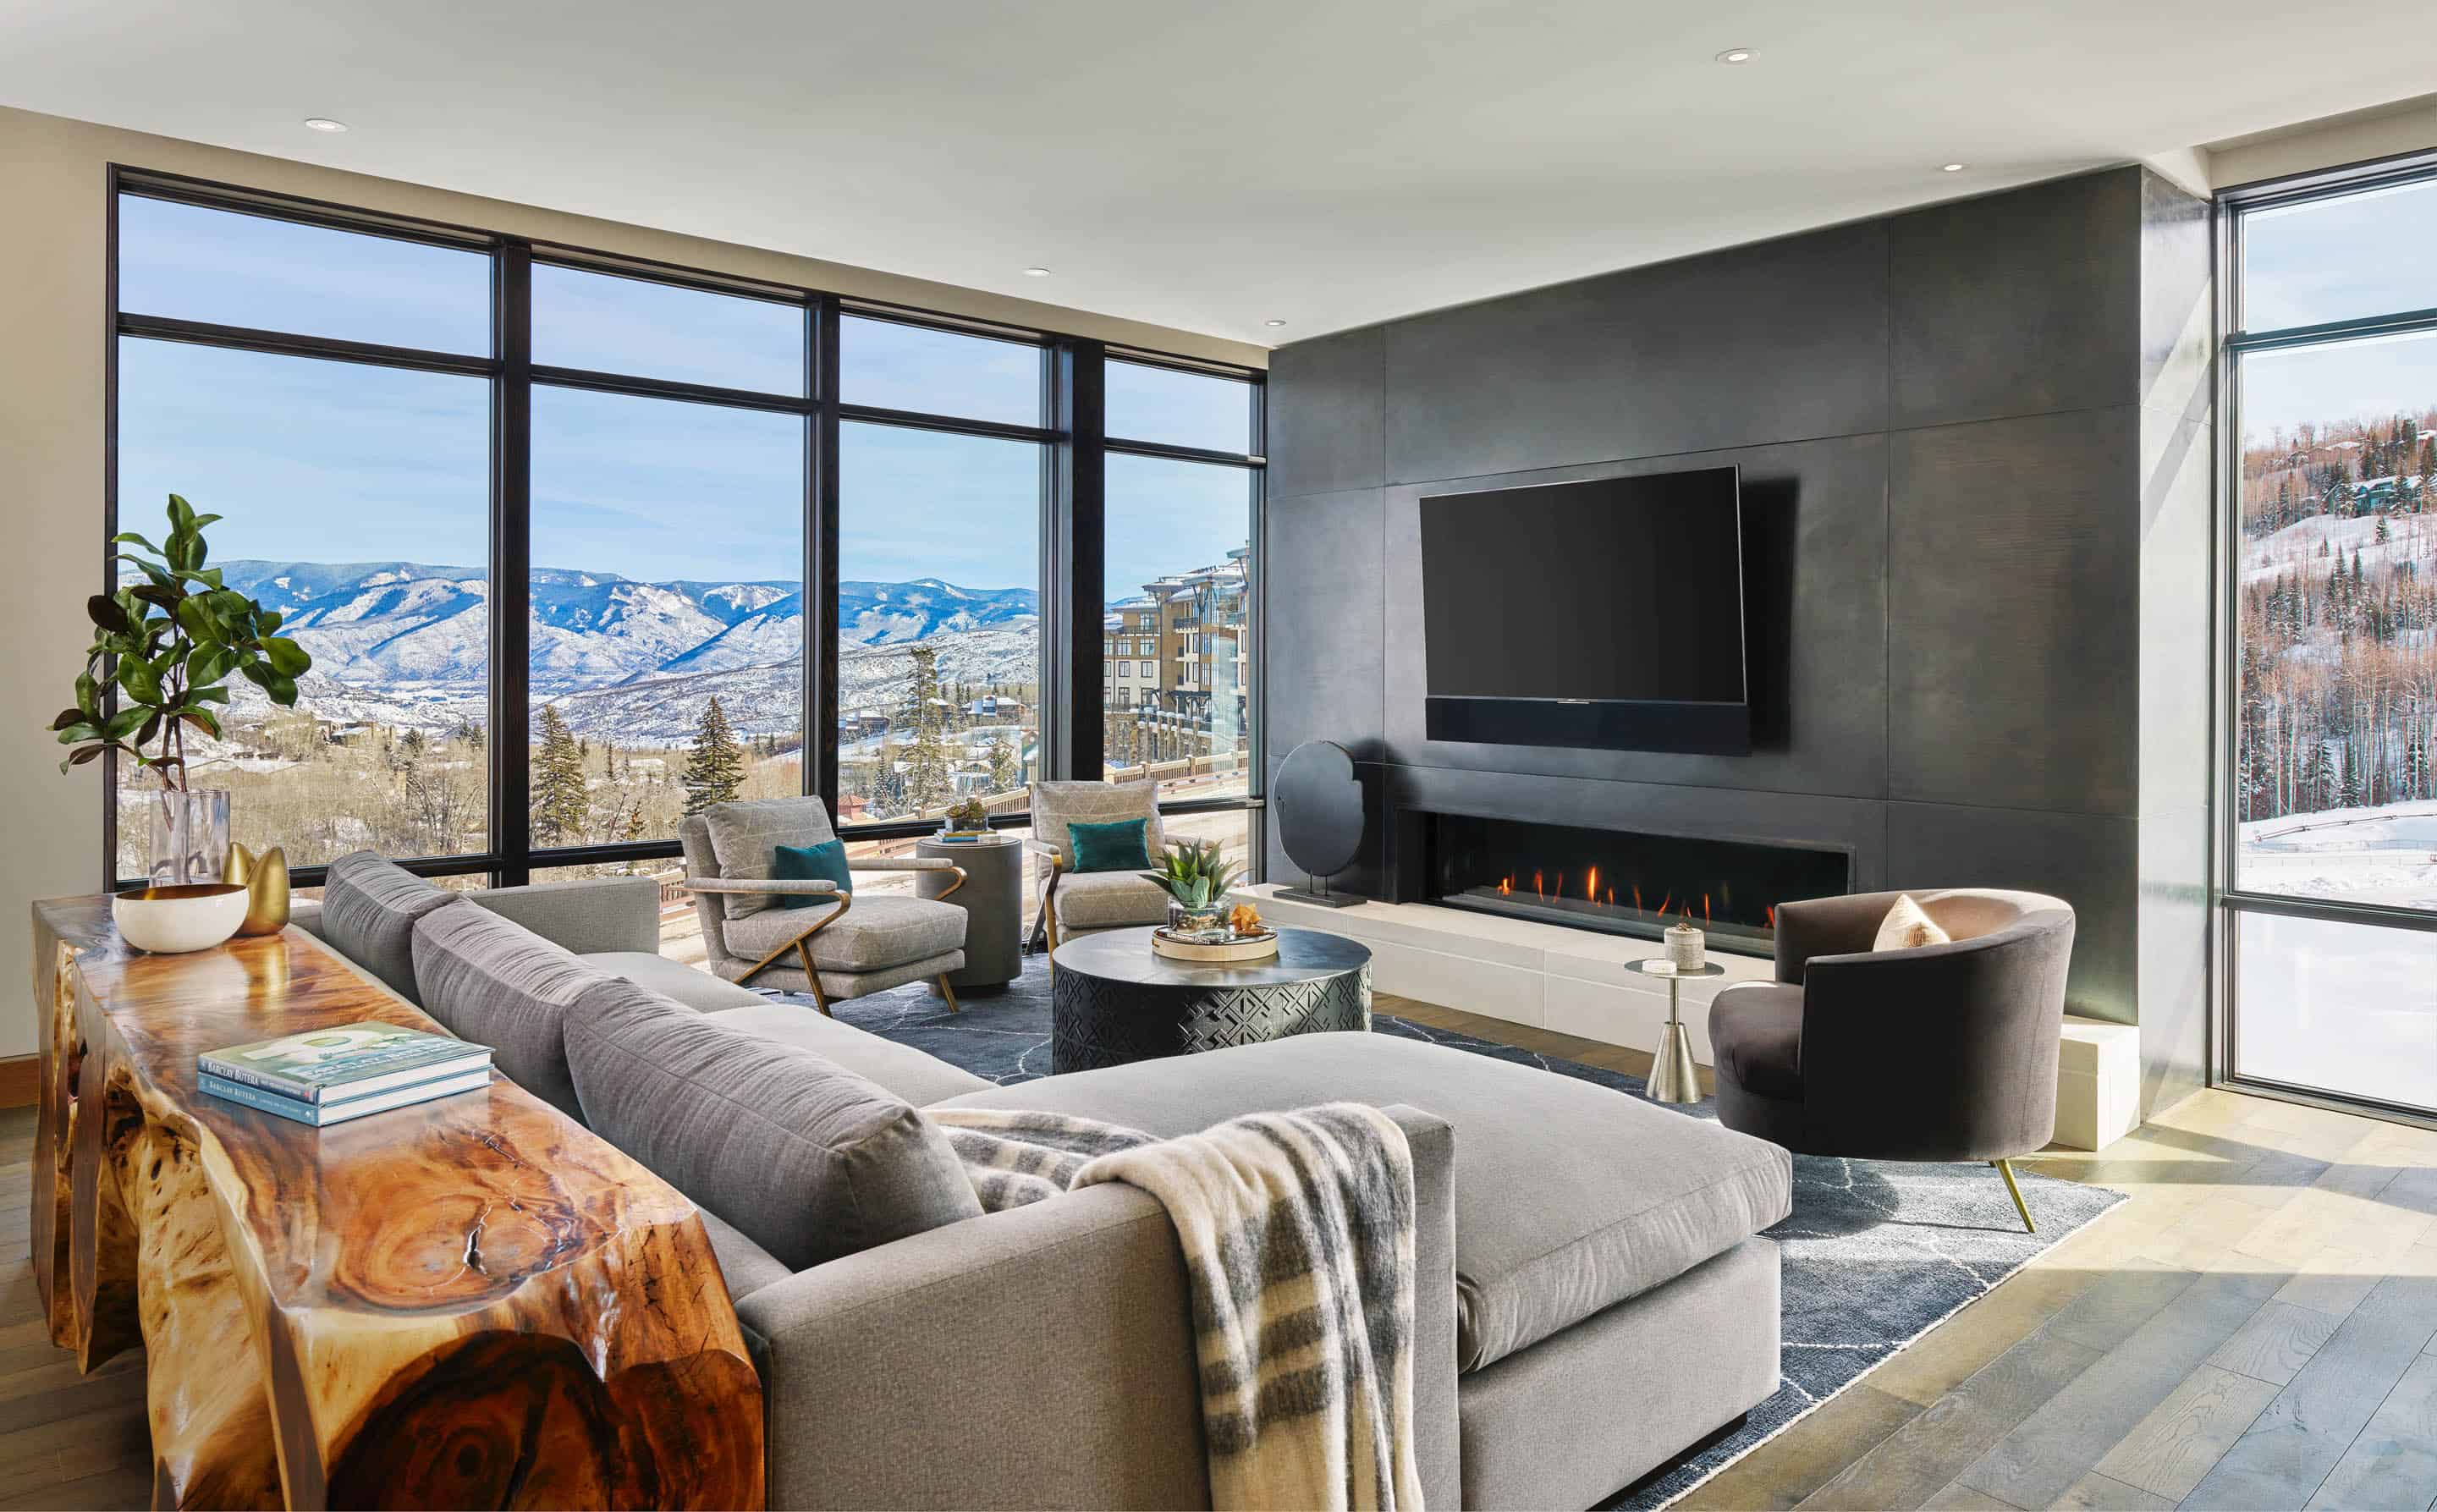 Property Image 1 - Stunning Views from Luxury Snowmass Condo